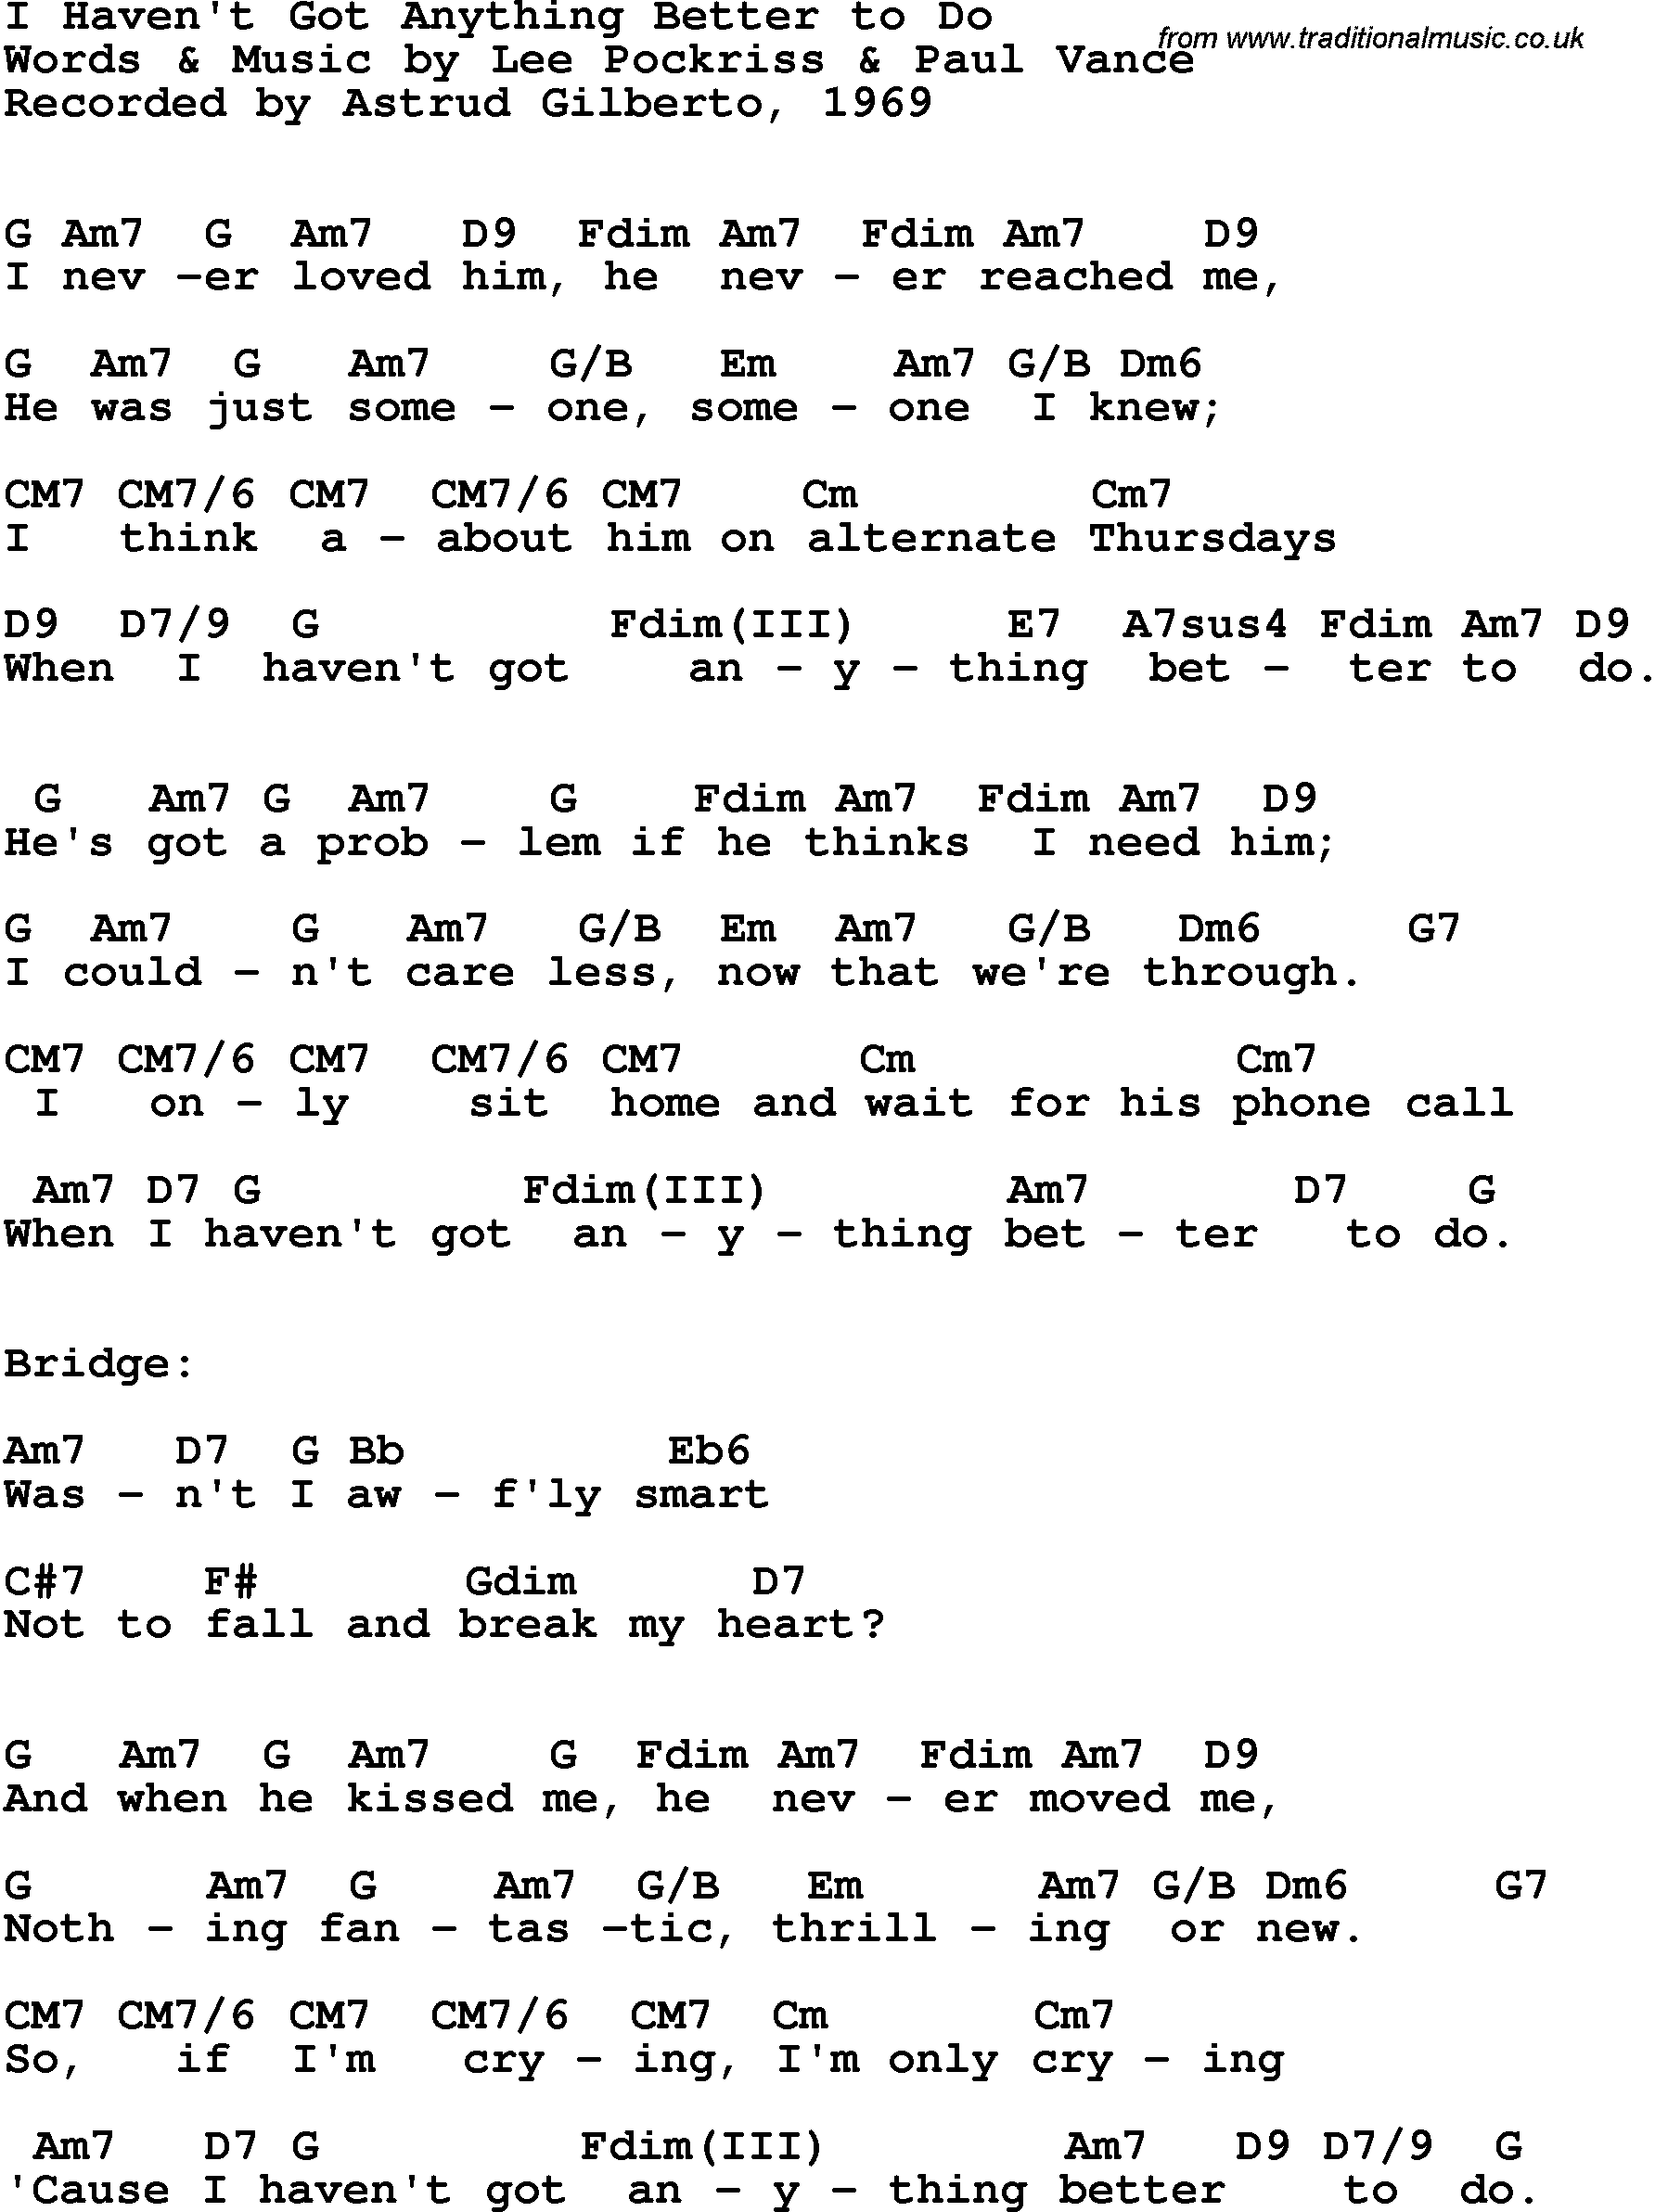 Song Lyrics with guitar chords for I Haven't Got Anything Better To Do - Astrud Gilberto, 1969